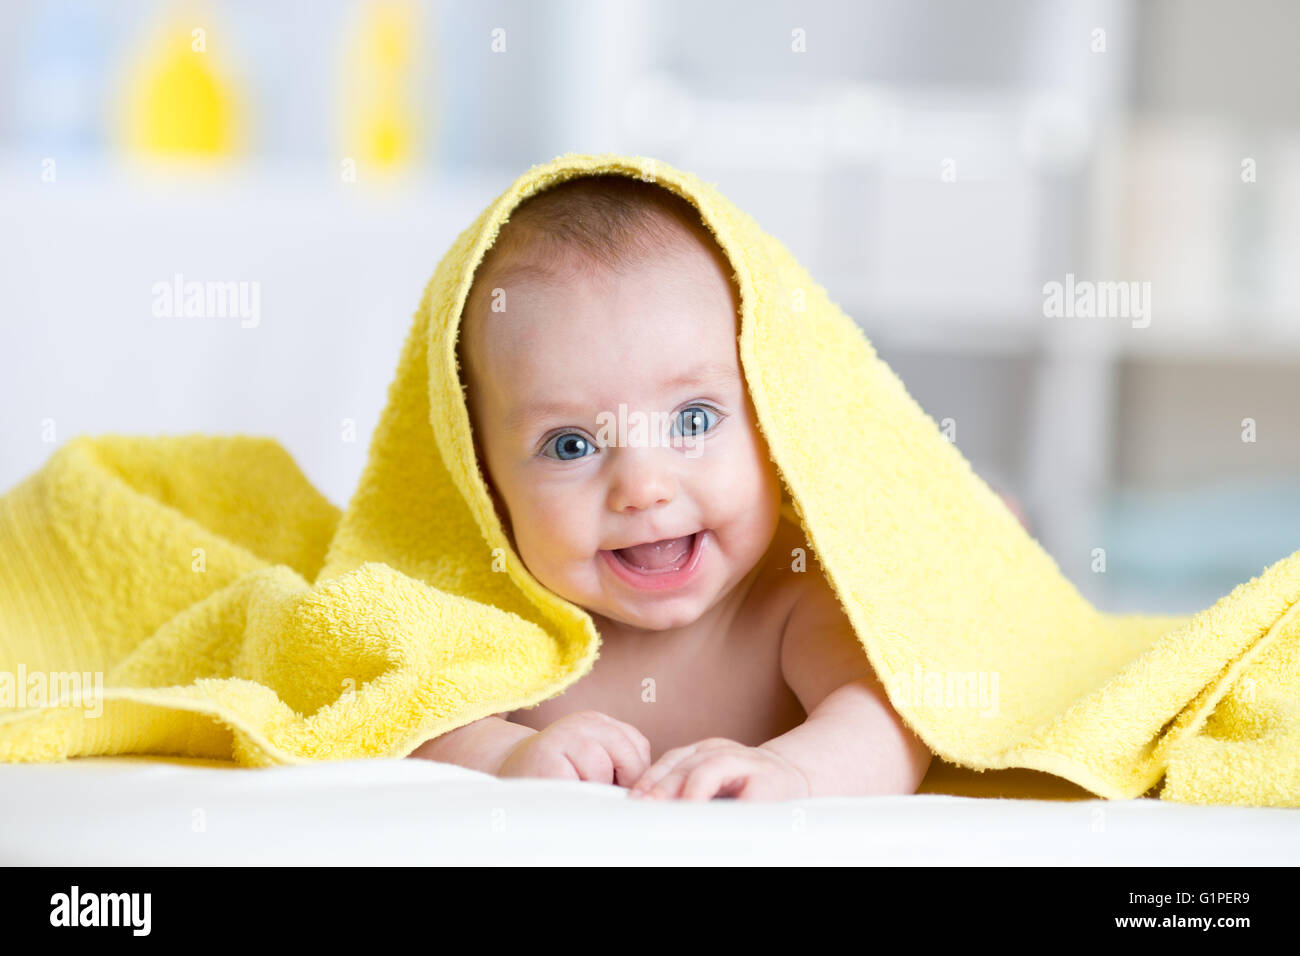 Cute smiling baby after shower or bathing Stock Photo